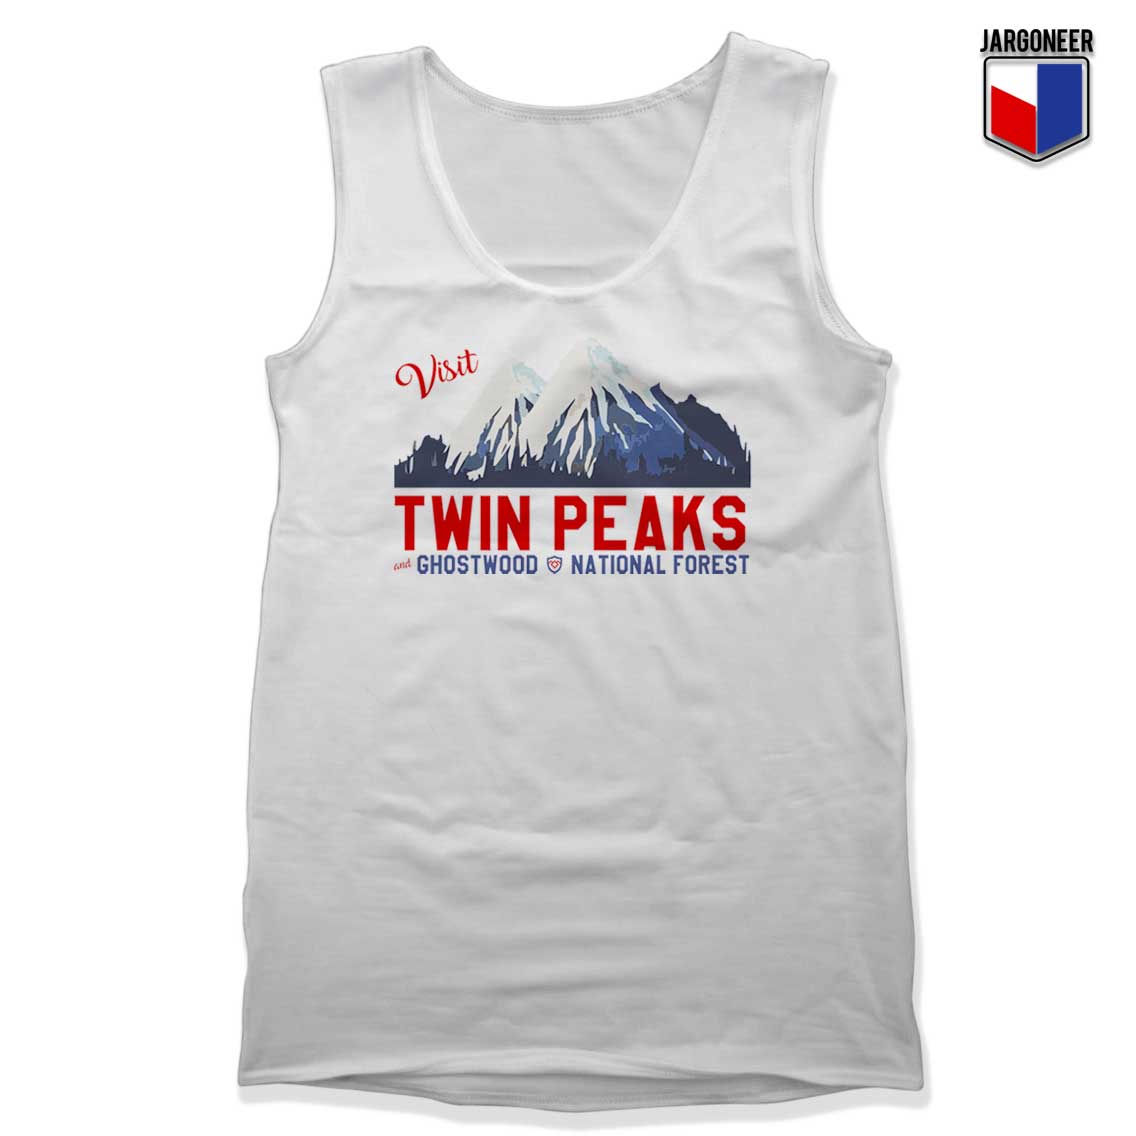 Twin Peaks Ghostwood National Forest Tank Top - Shop Unique Graphic Cool Shirt Designs